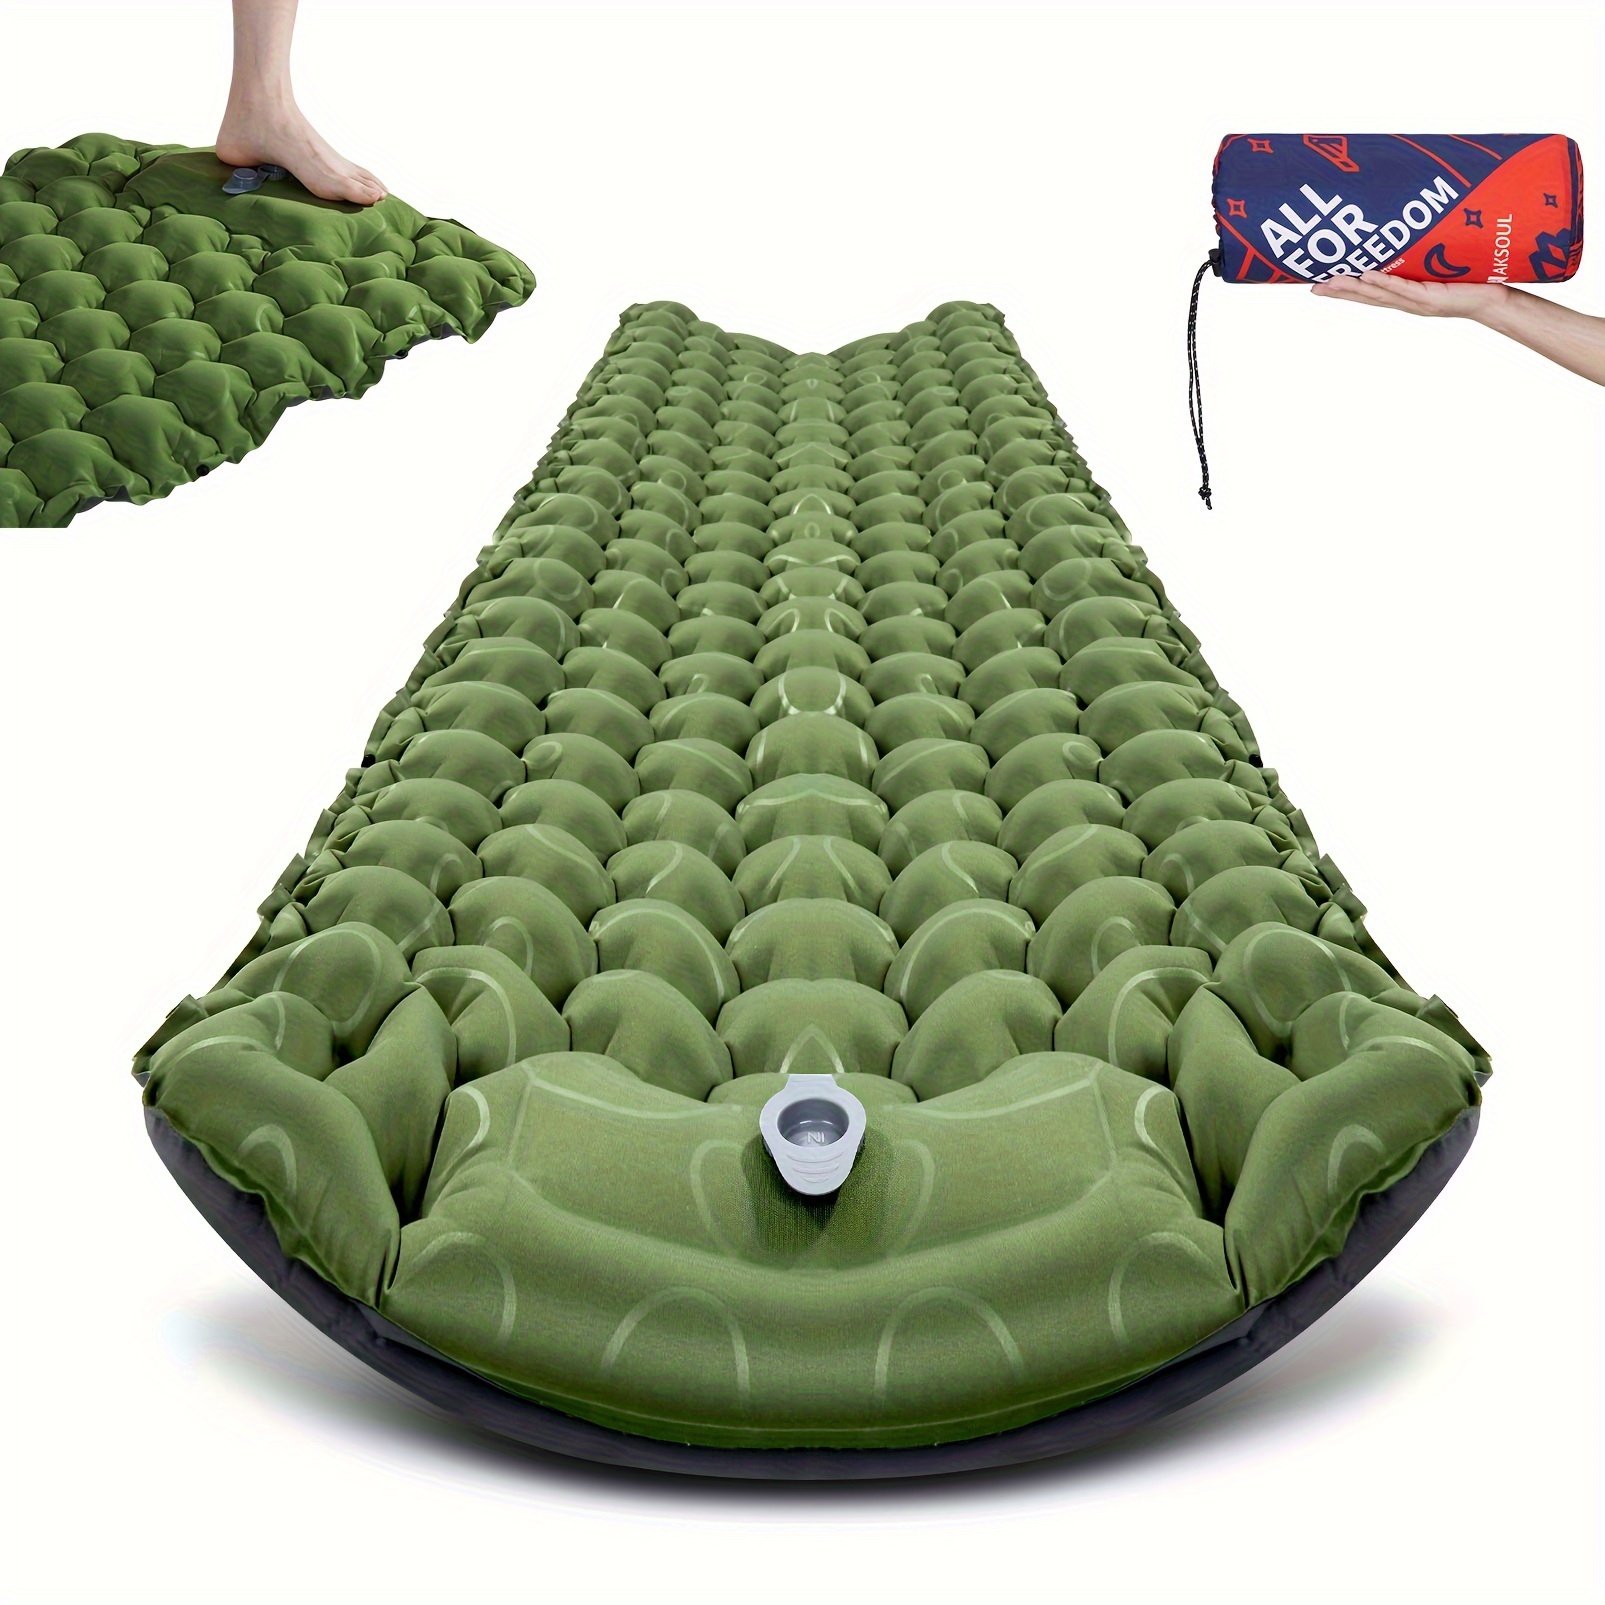 

1pc Inflatable Sleeping Pad Camping Mat Camping Mattress For Backpacking, Hiking, Traveling